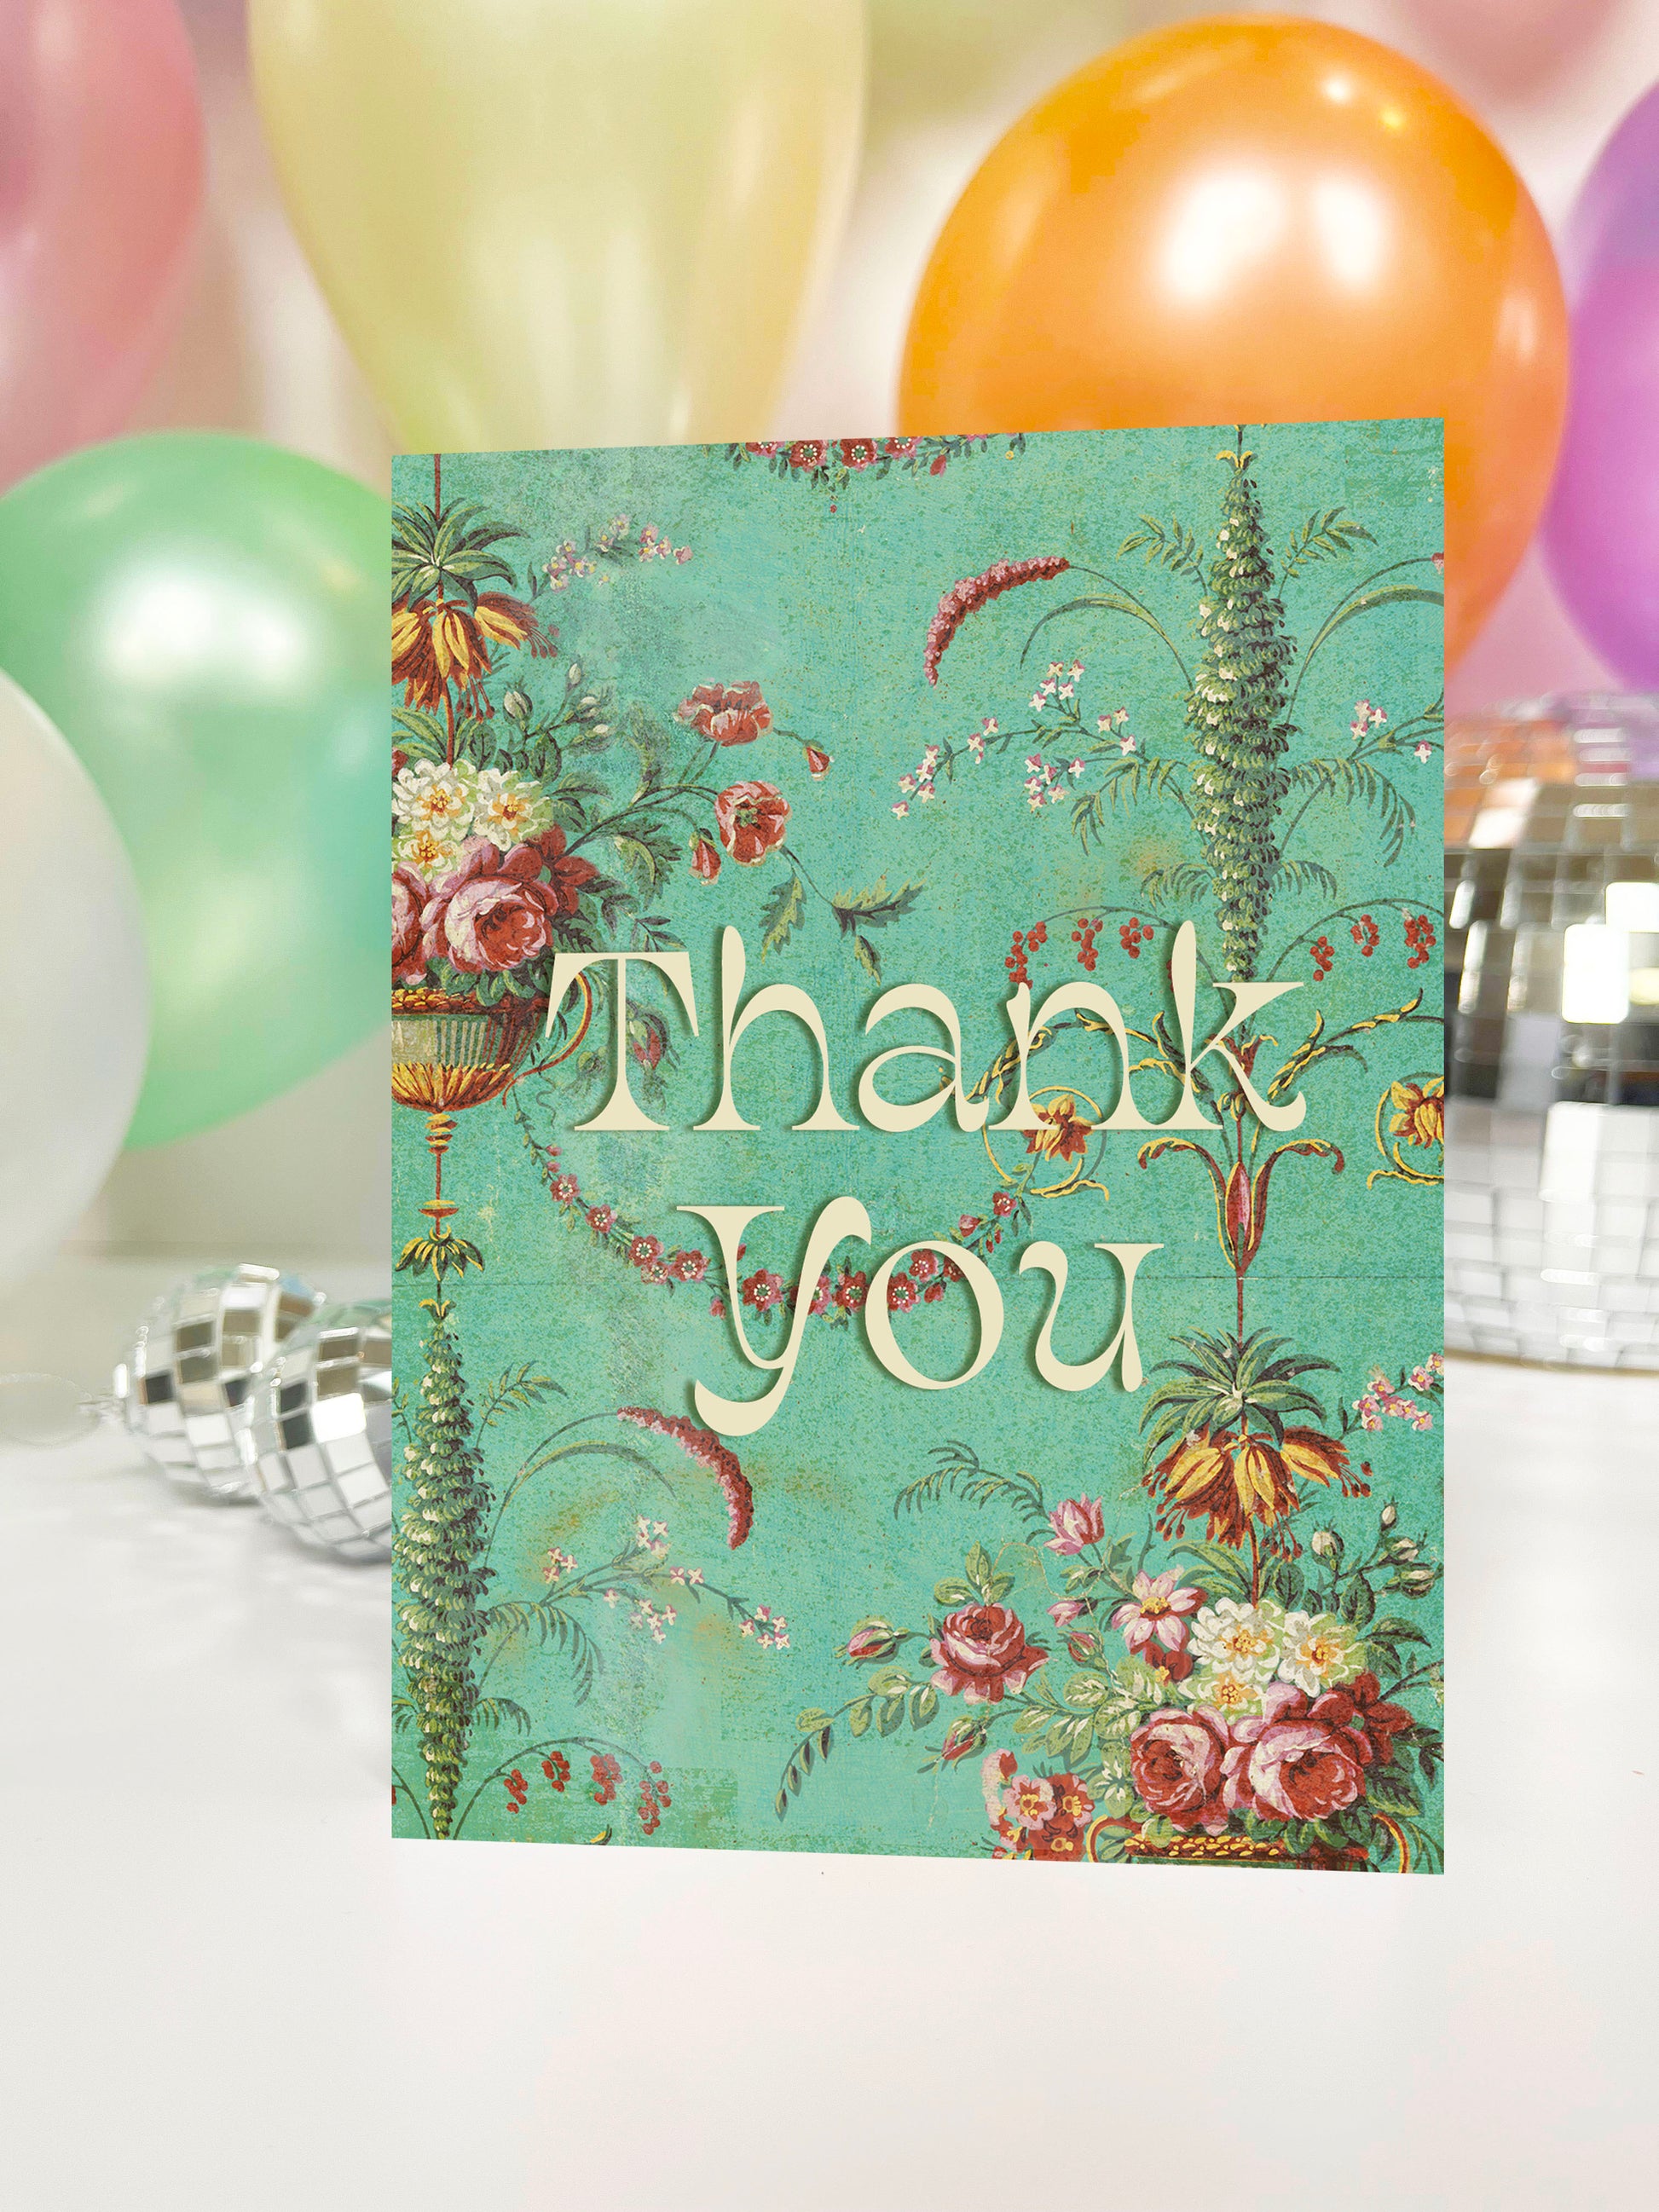 mint green pink floral print vintage look thank you card retro maximalist style victorian aesthetic cute thank you card flowers garden mothers day